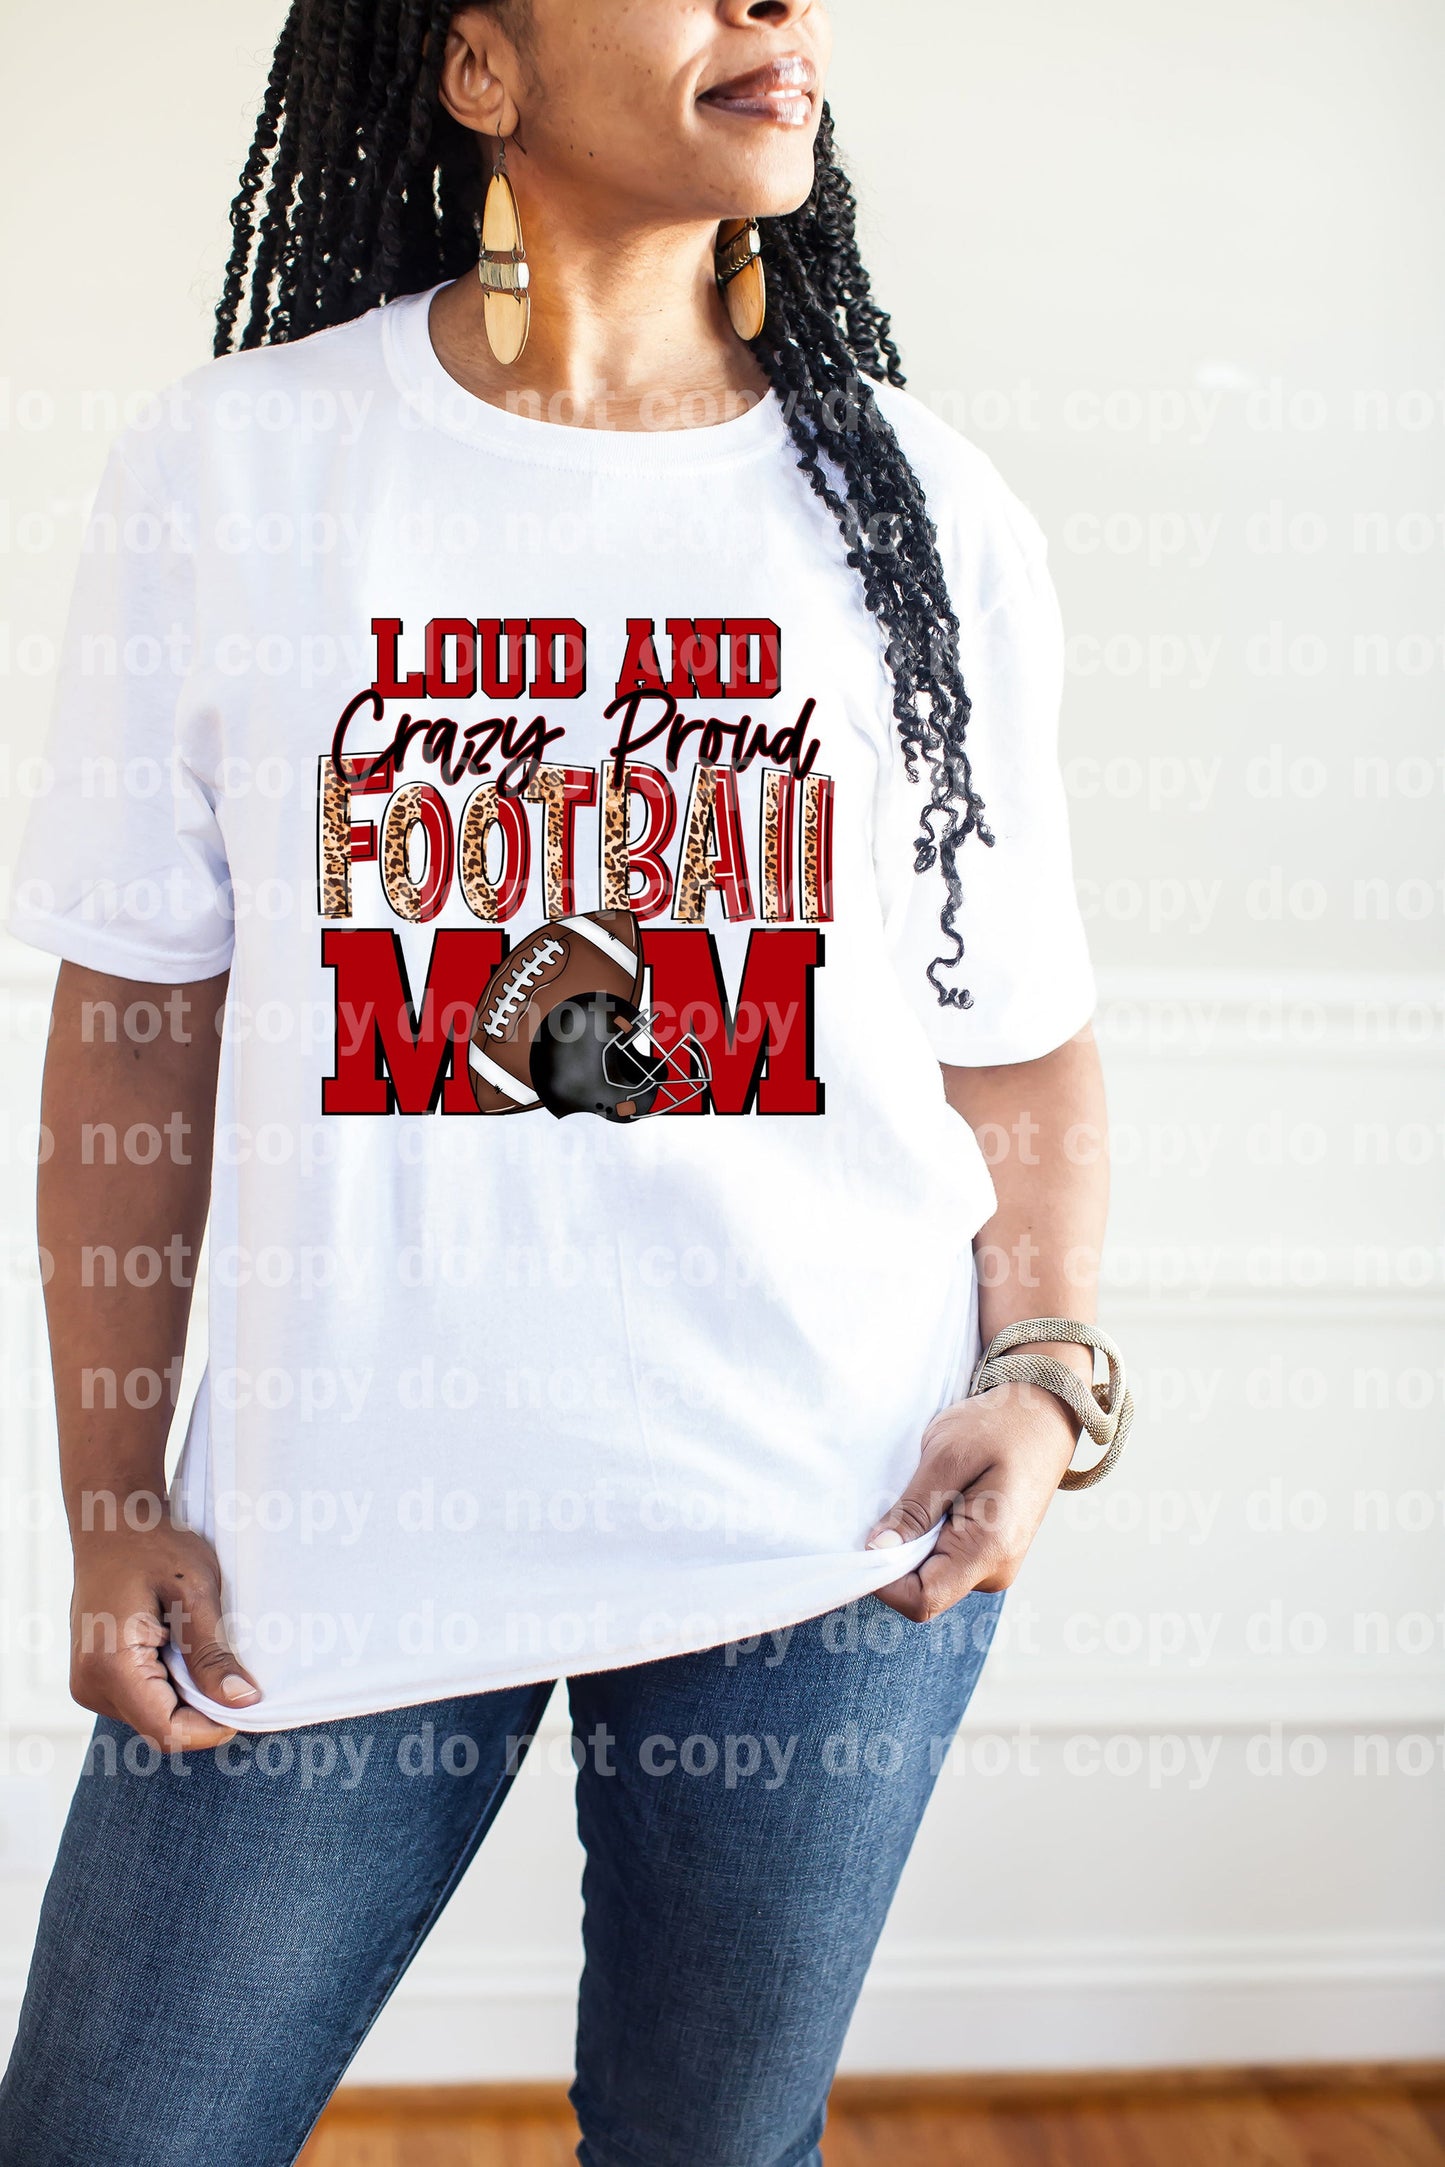 Loud And Crazy Proud Football Mom Red Dream Print or Sublimation Print